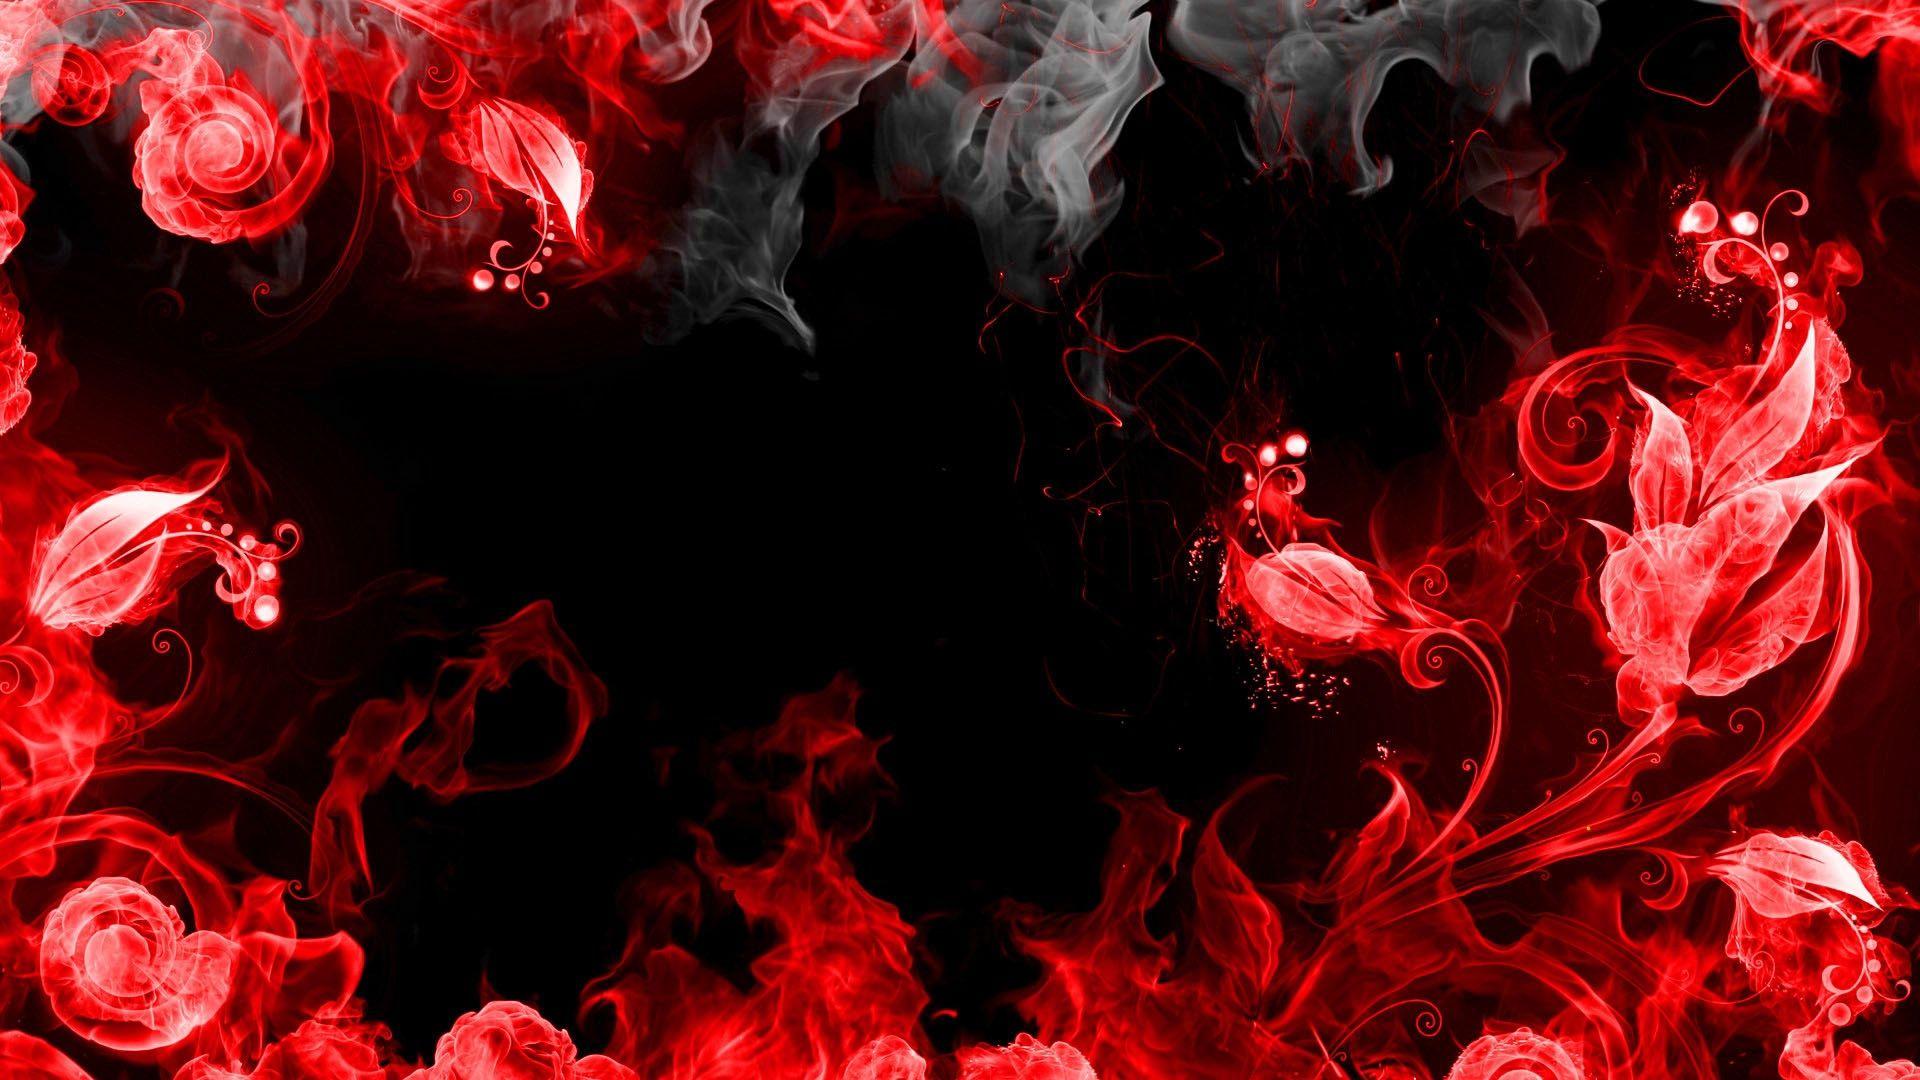 Download wallpaper 1920x1080 abstraction, red, smoke, black HD